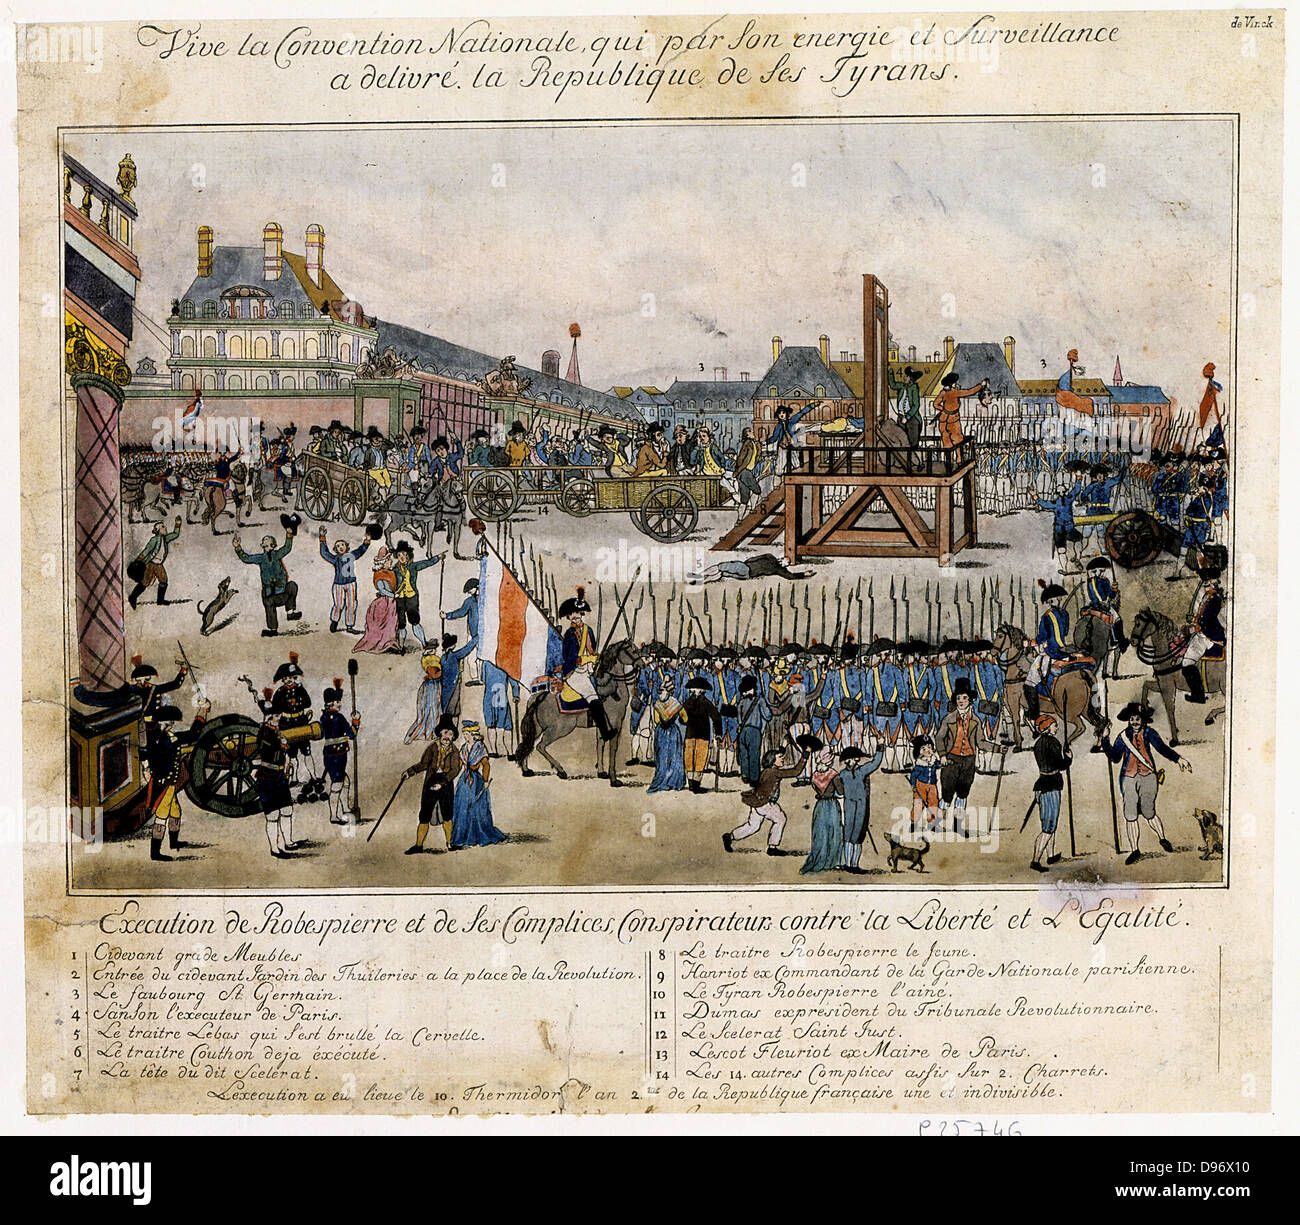 Execution by guillotine of Robespierre (1758-1794) French revolutionary, and his conspirators. Robespierre mounts scaffold. In cart left of scaffold are Hanriot, Robespieree, Dumas and Saint-Just. Behind them are are 14 conspirators in 2 carts. Contemporary hand-coloured lithograph by de Vinck. Stock Photo